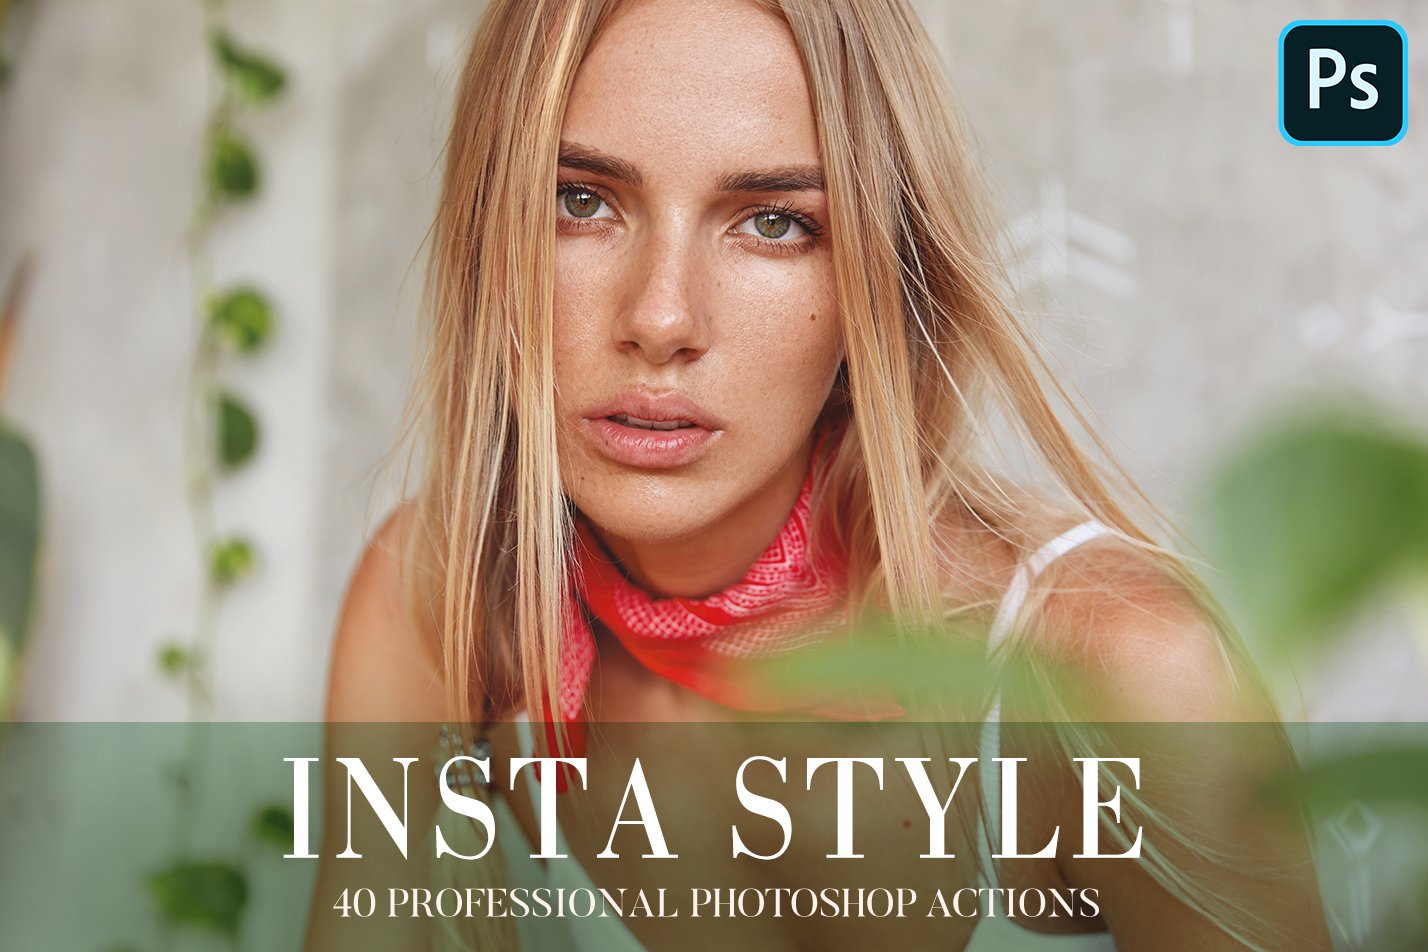 Photoshop Actions - Insta Stylecover image.